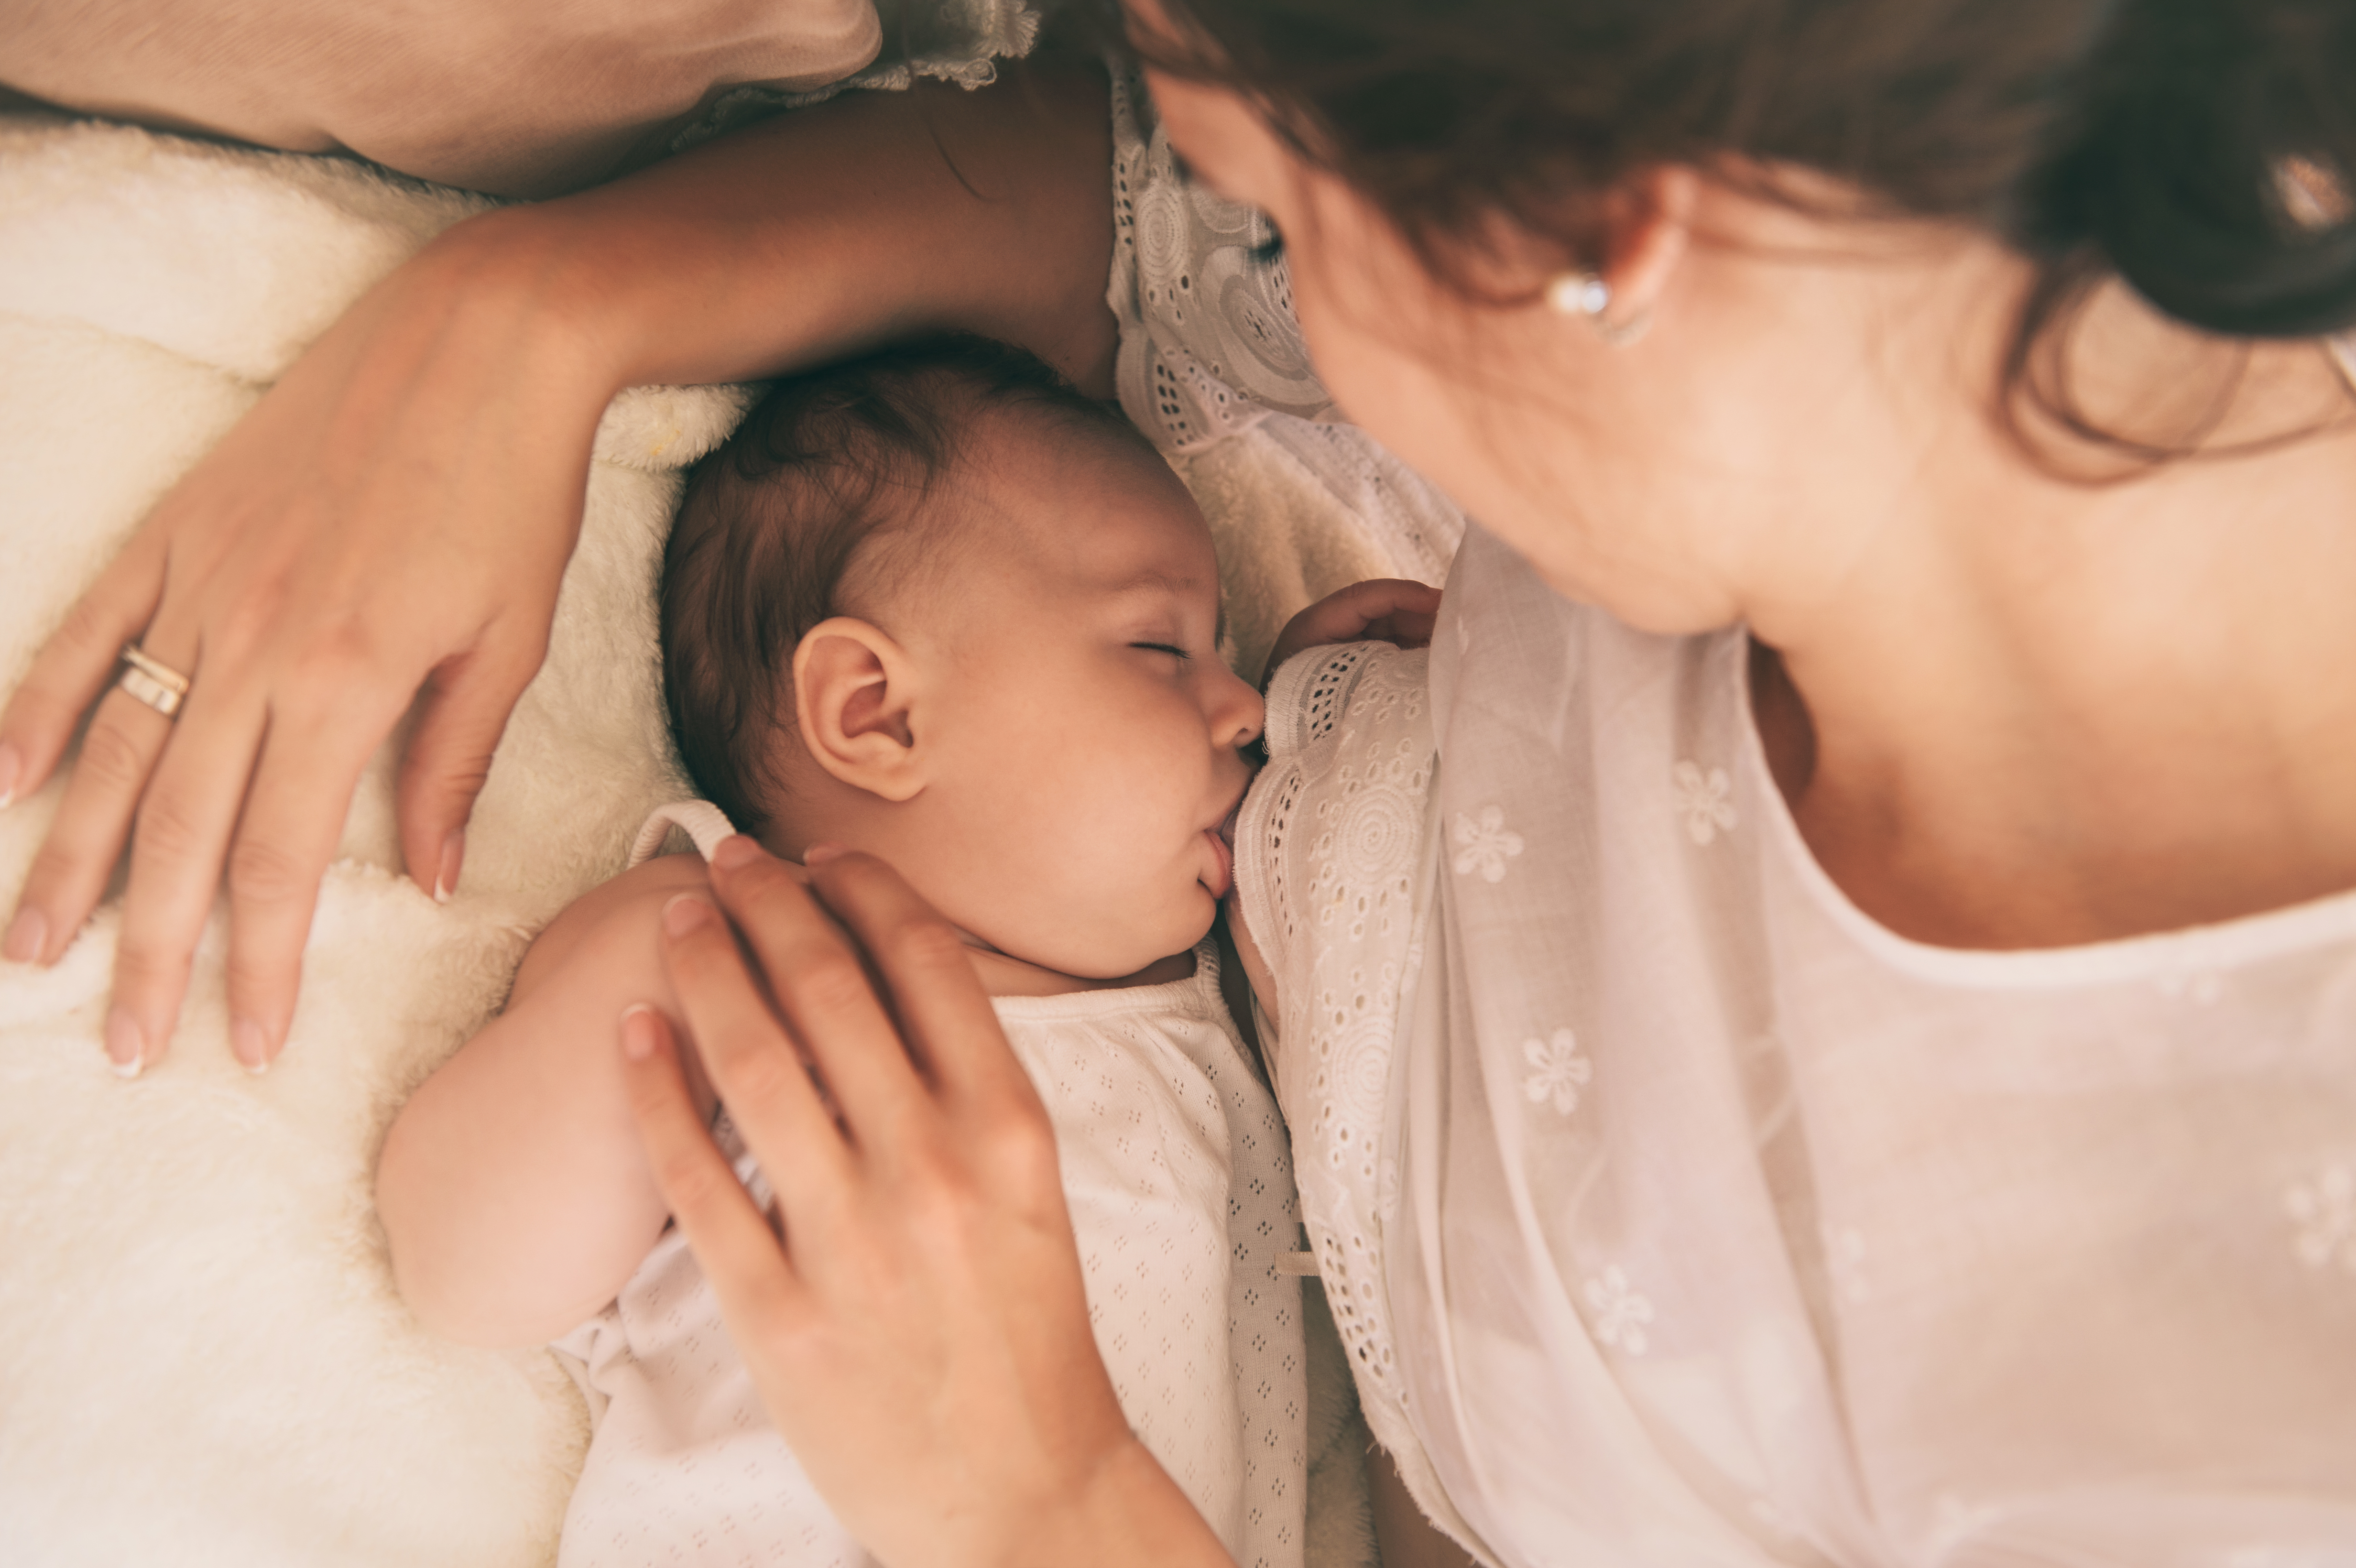 How To Stop Breastfeeding, A Guide For Your Body And Your Baby